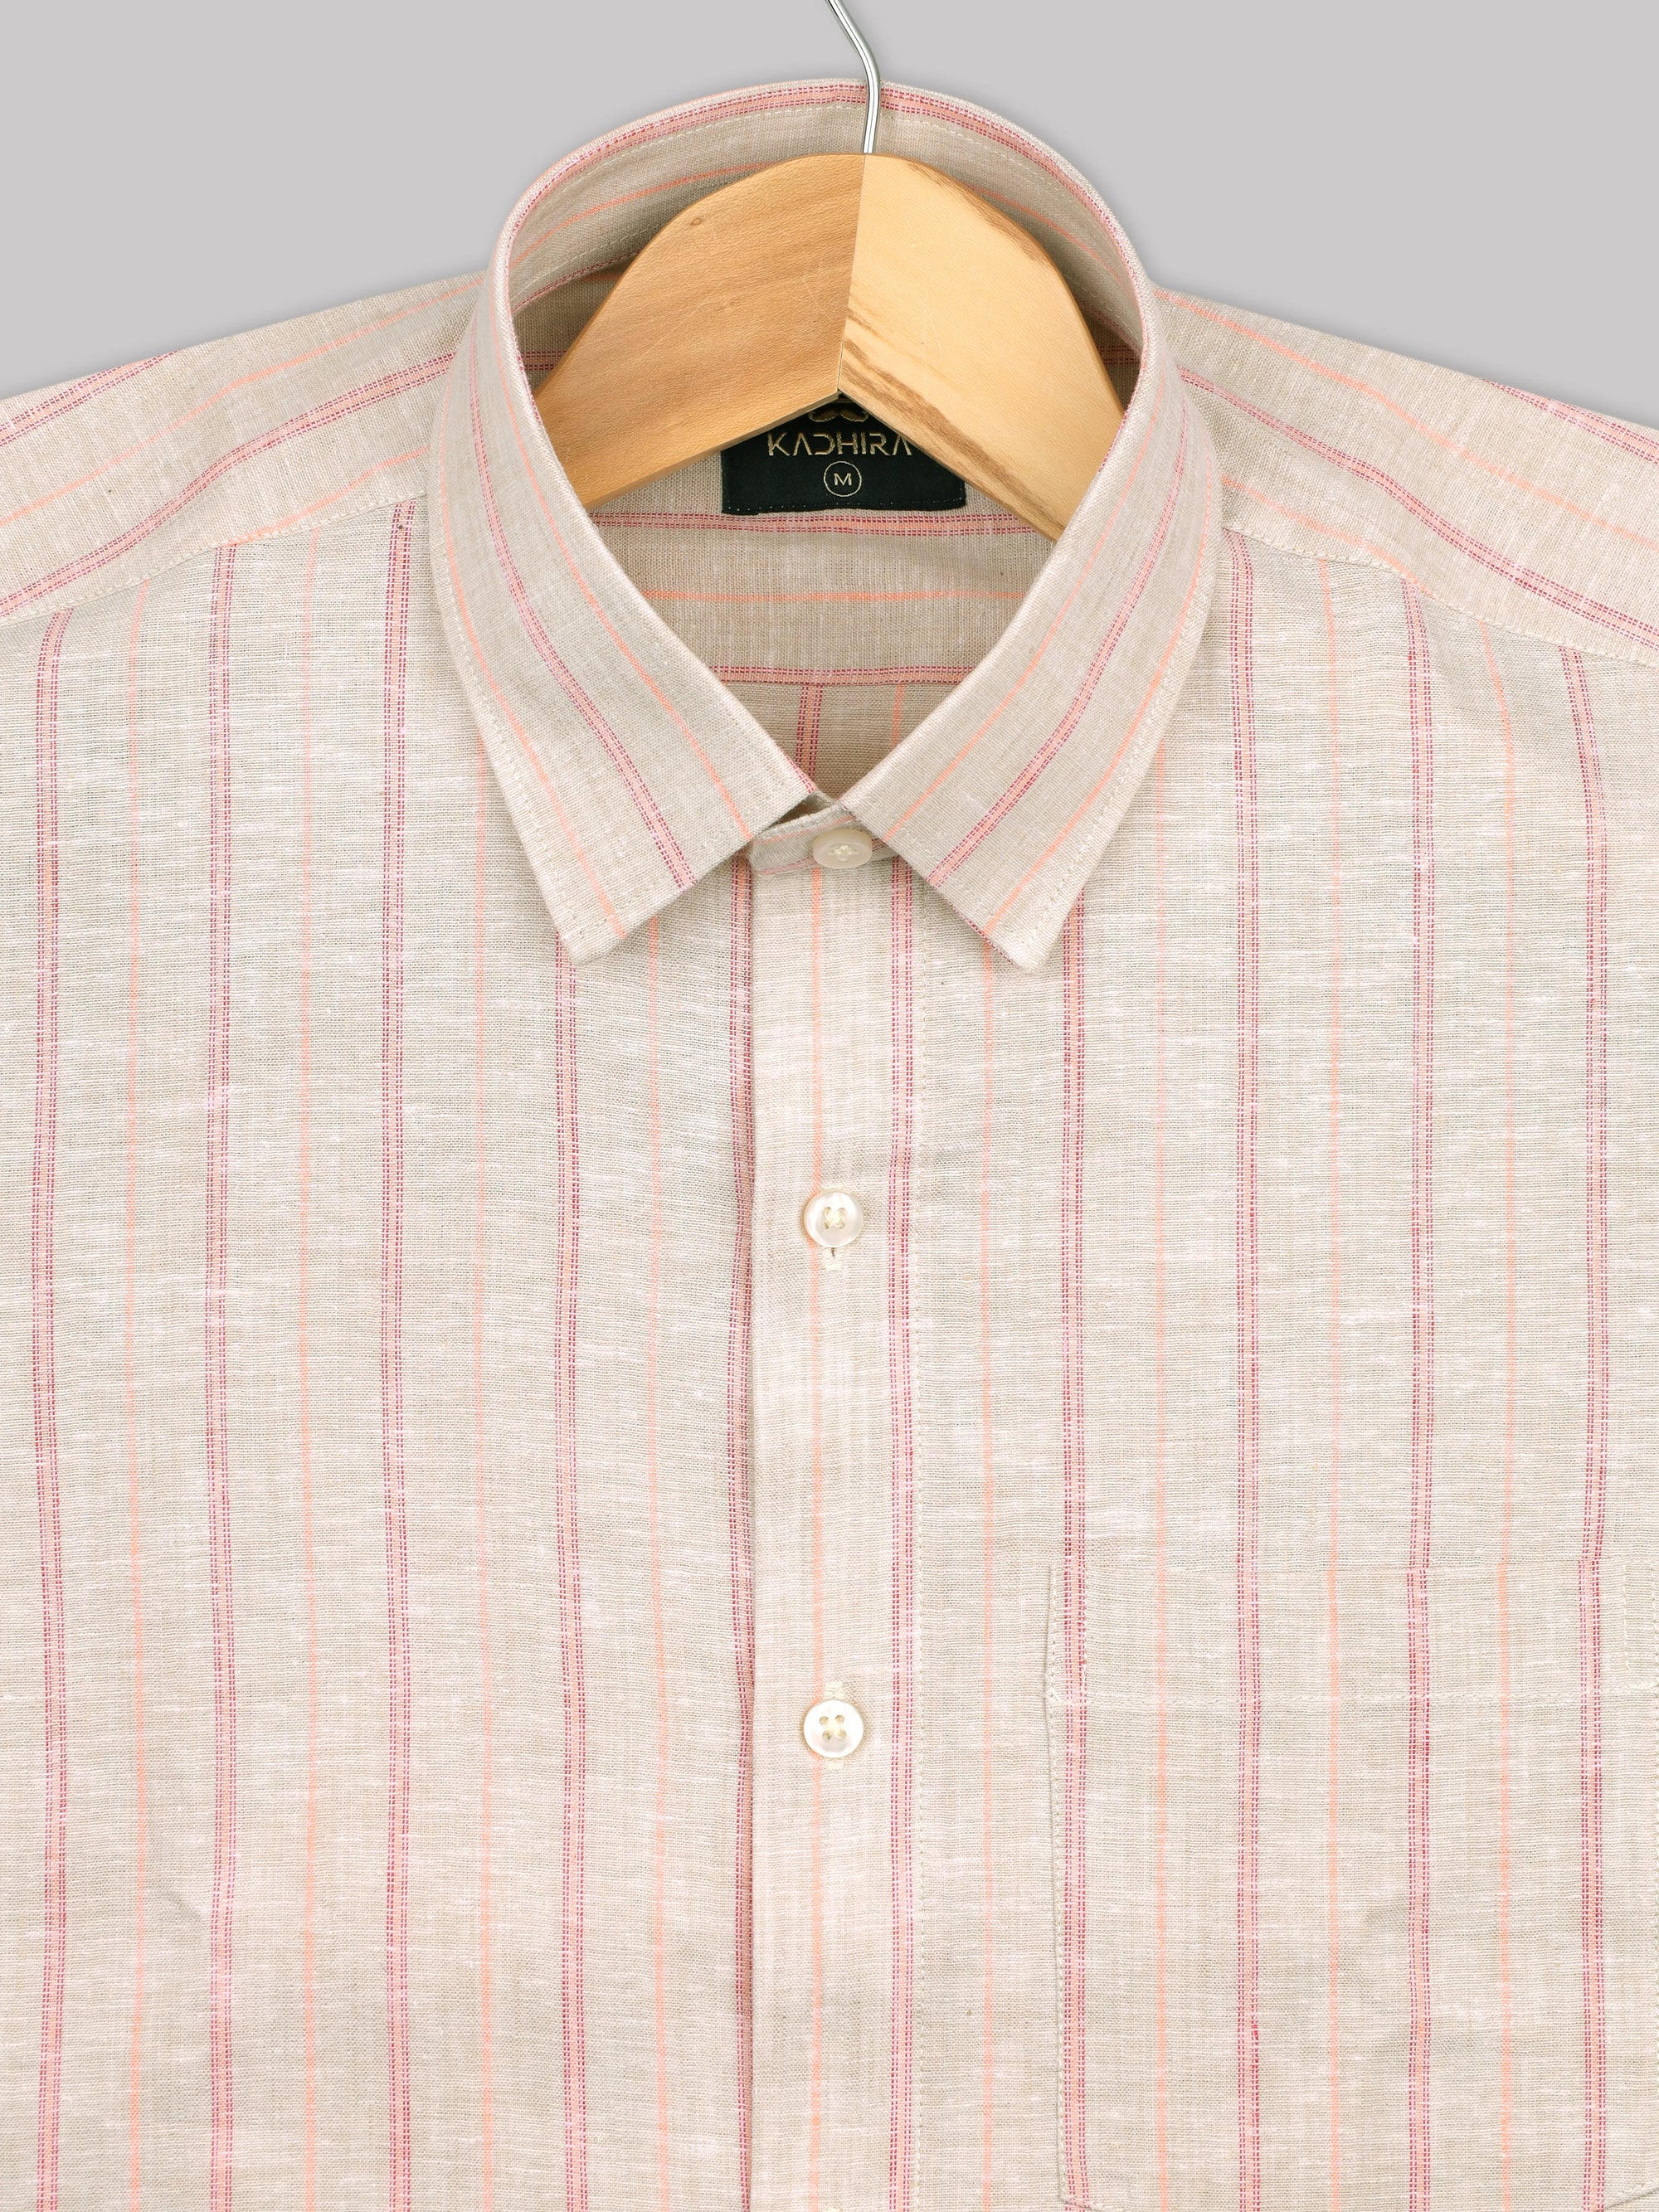 Beige Cream With Red And Orange Stripe Pure Linen Shirt-[ONSALE]